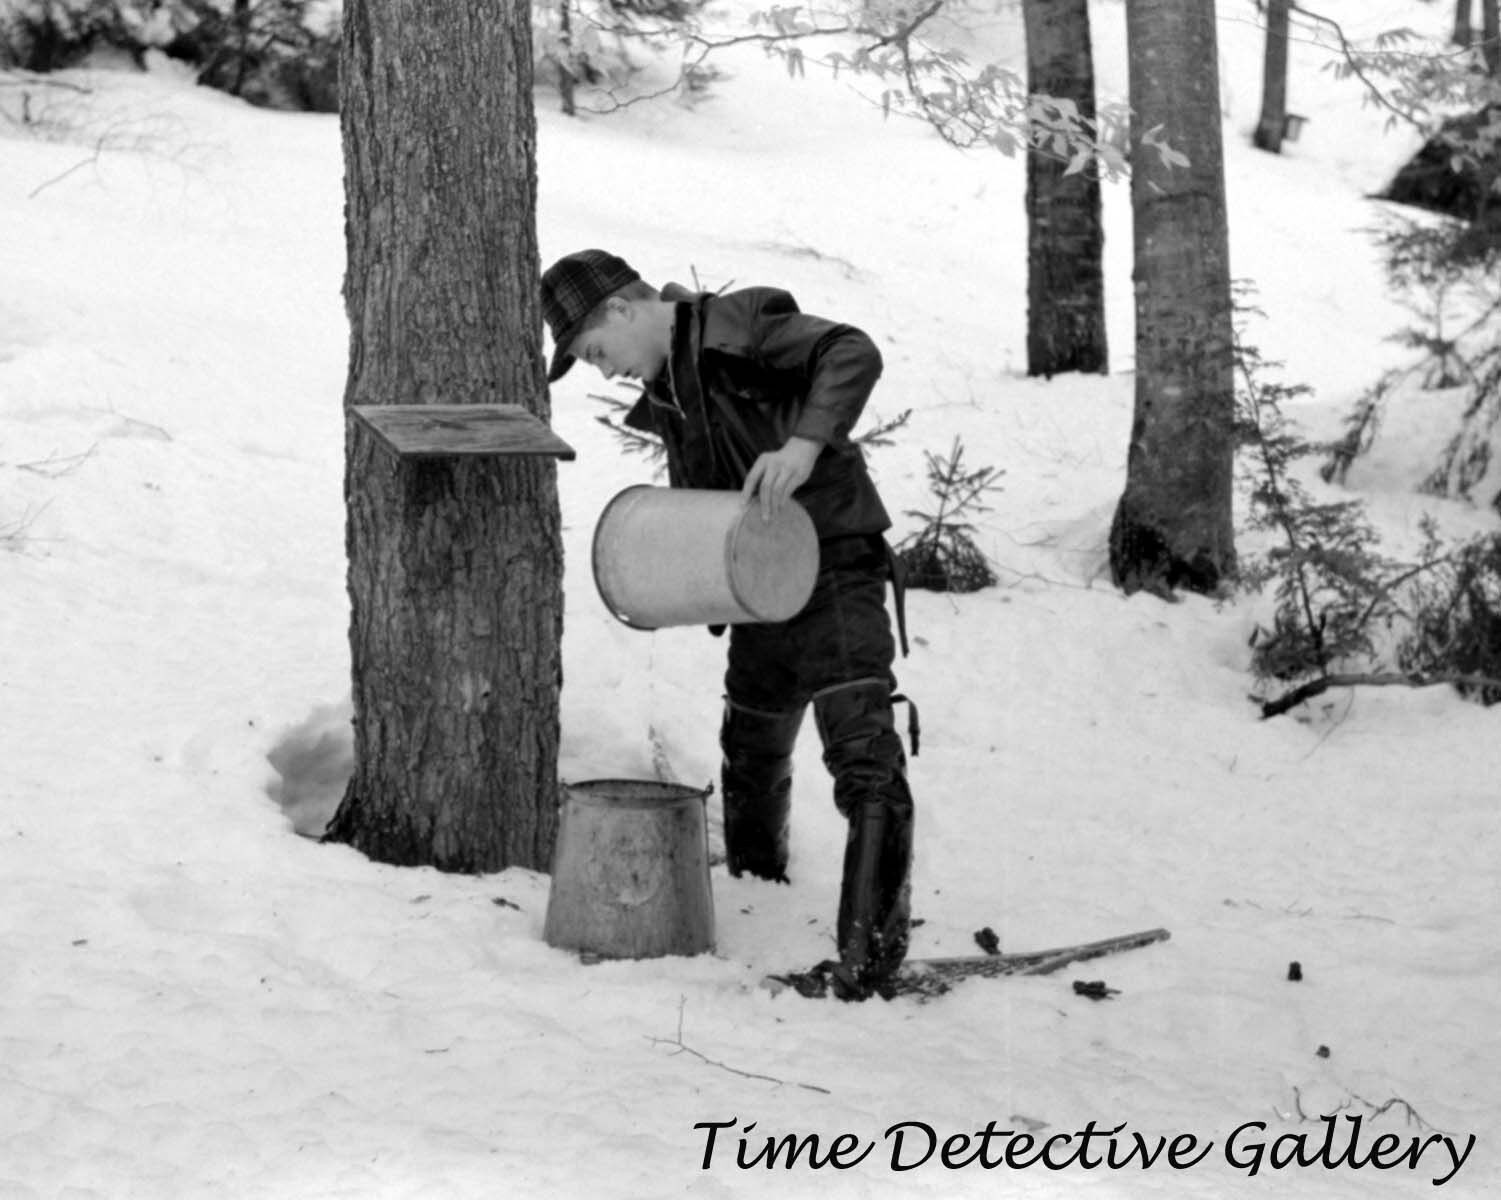 Pouring Sap from Maple Tree for Syrup, Waitsfield VT -1940- Historic Photo Print